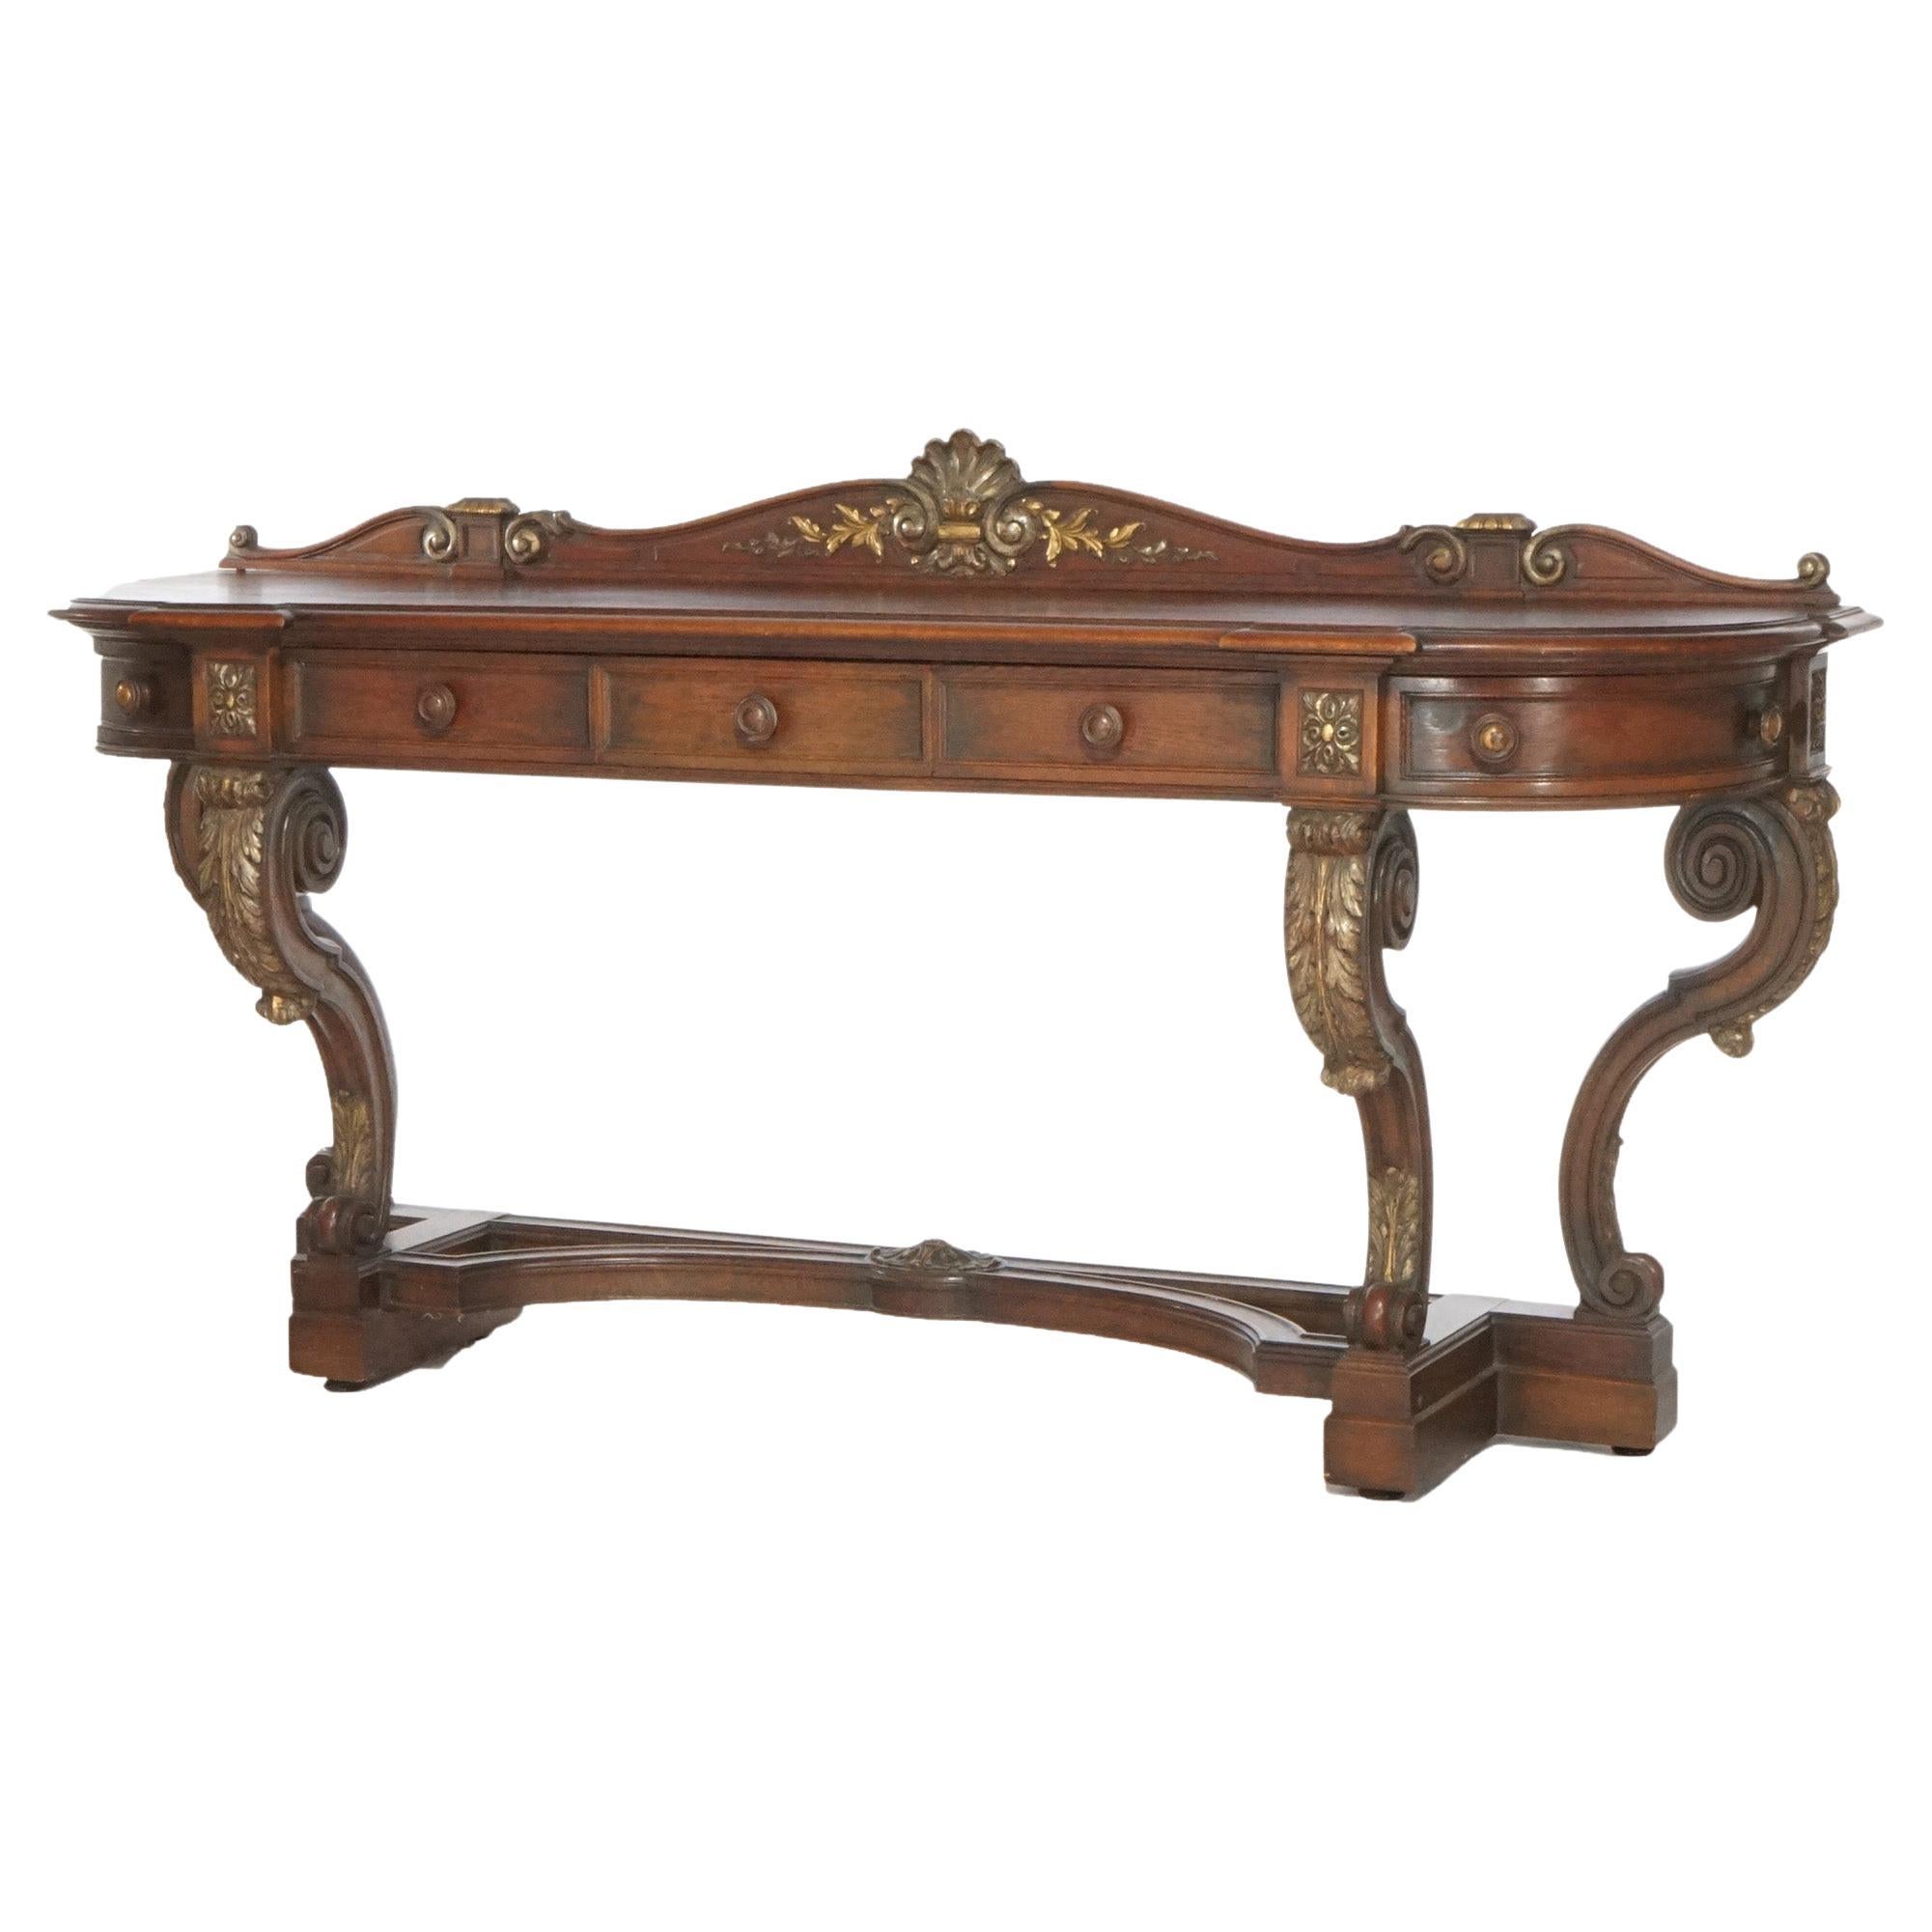 Antique Italian Style Carved Oak & Giltwood Sideboard, circa 1910